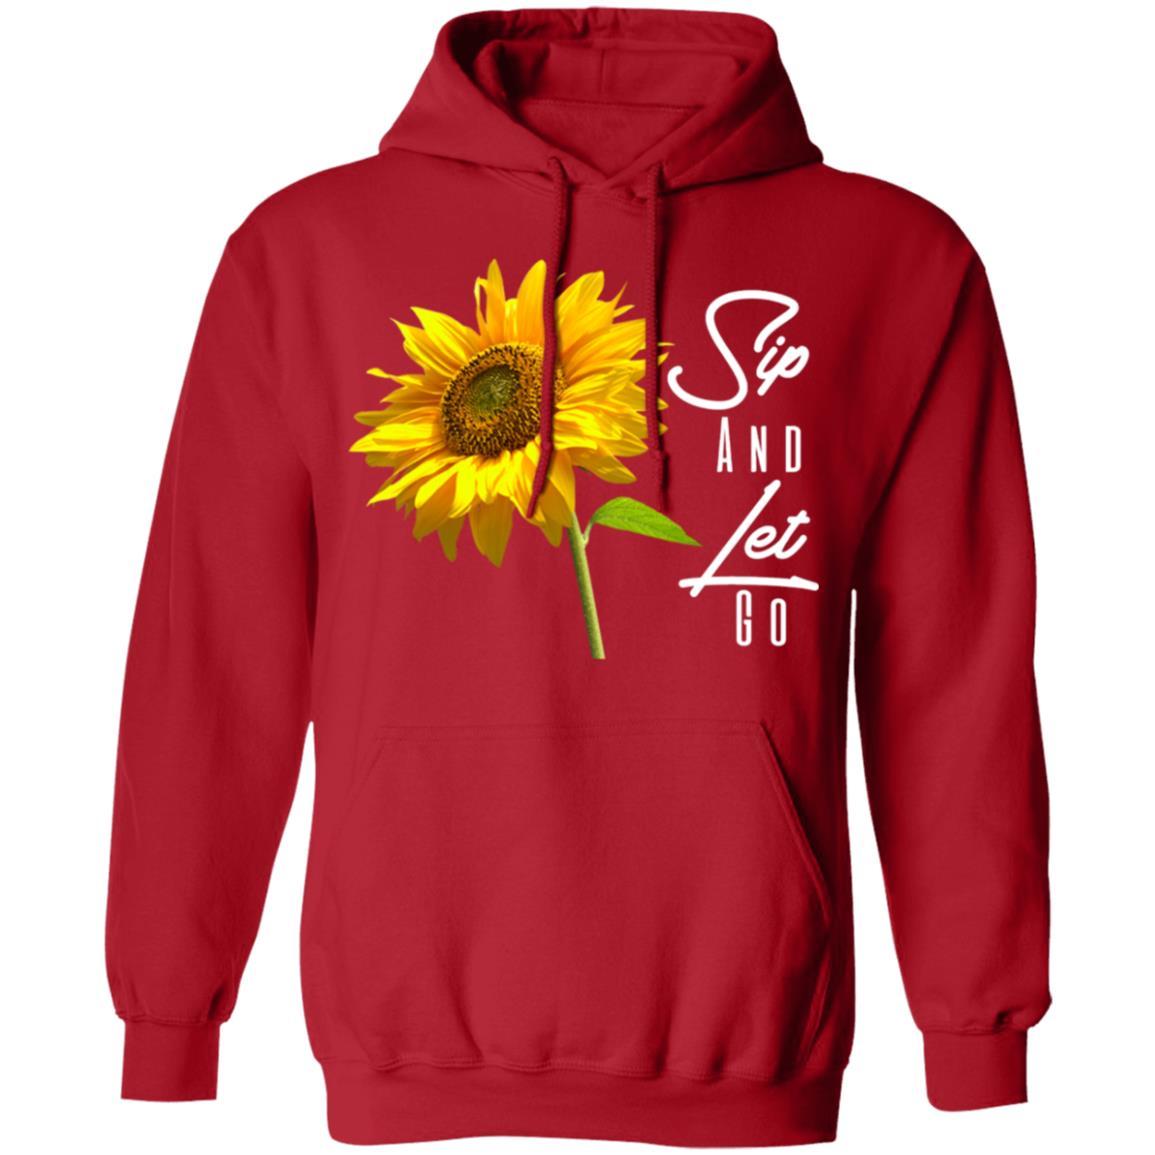 Sip And Let Go Pullover Hoodie Red - Loyalty Vibes